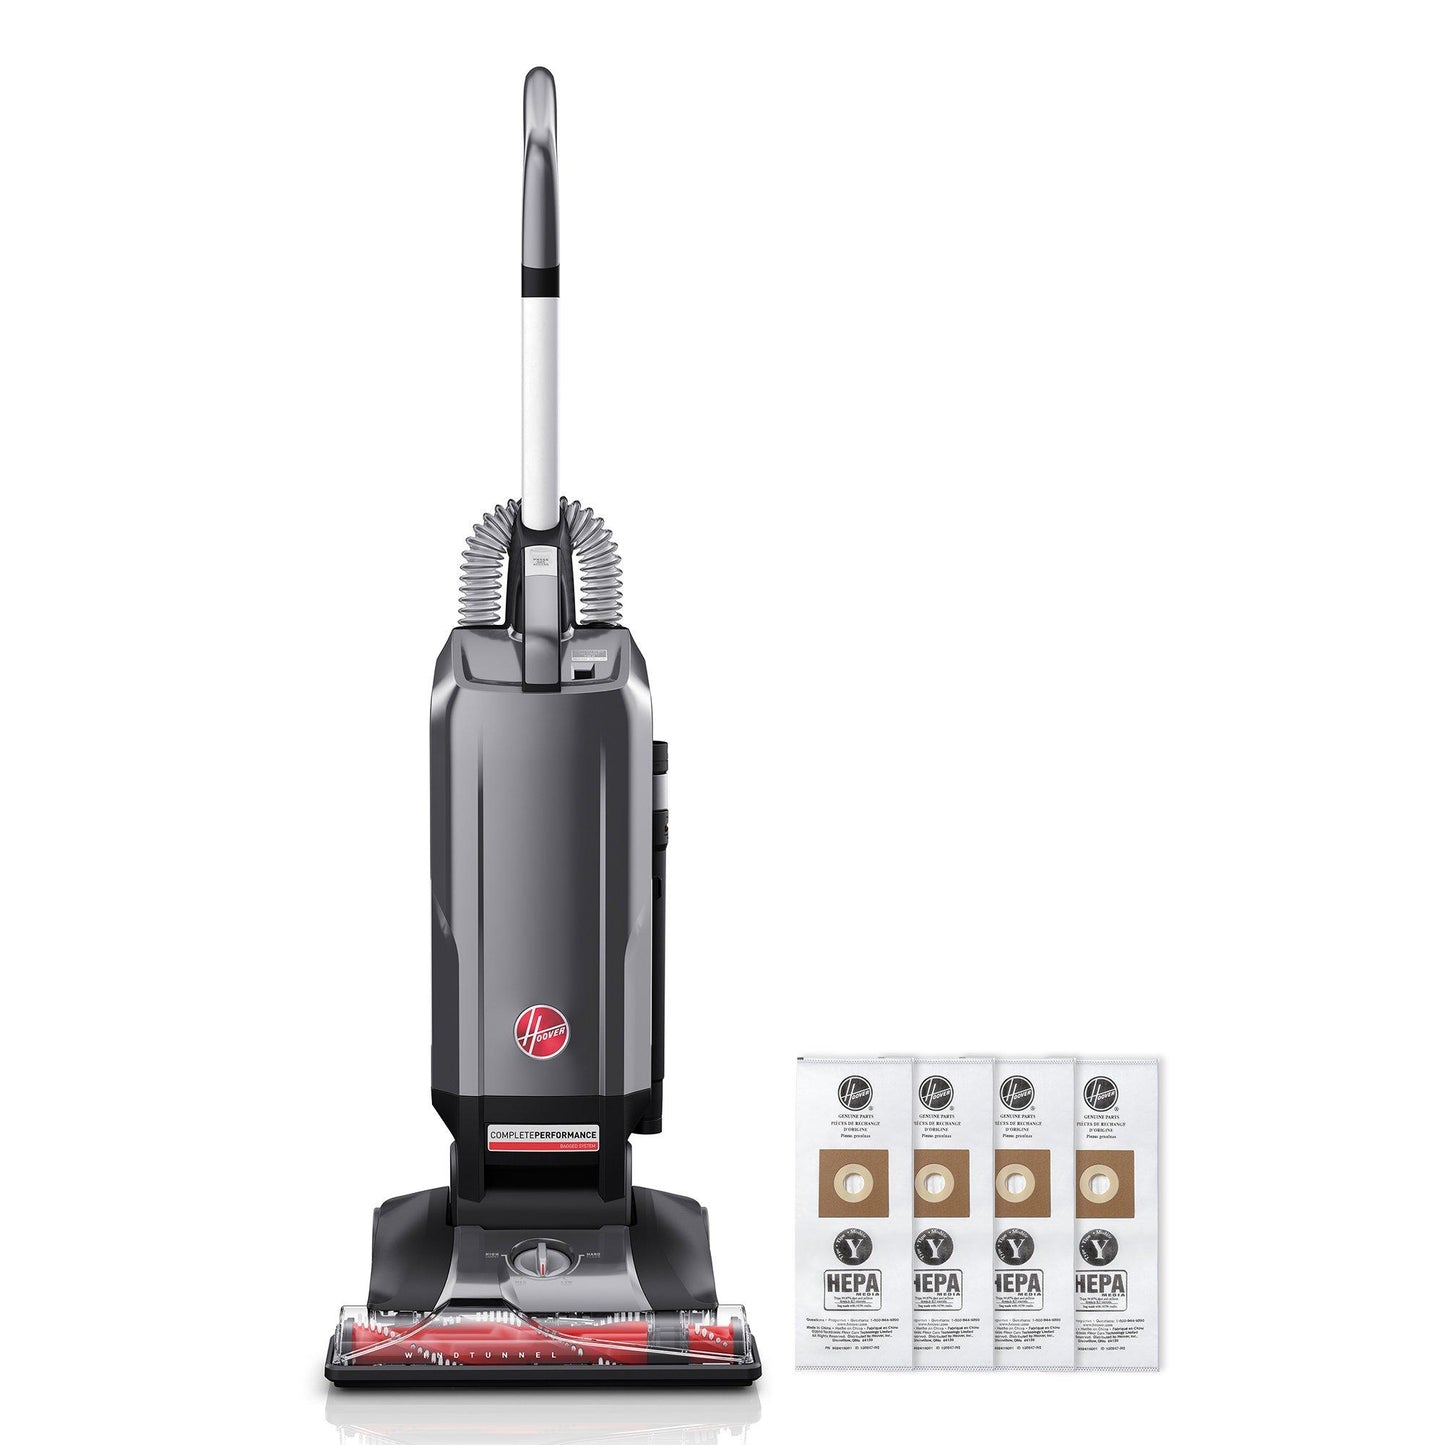 Complete Performance Advanced Bagged Upright Vacuum + 4 HEPA Bags Exclusive Bundle